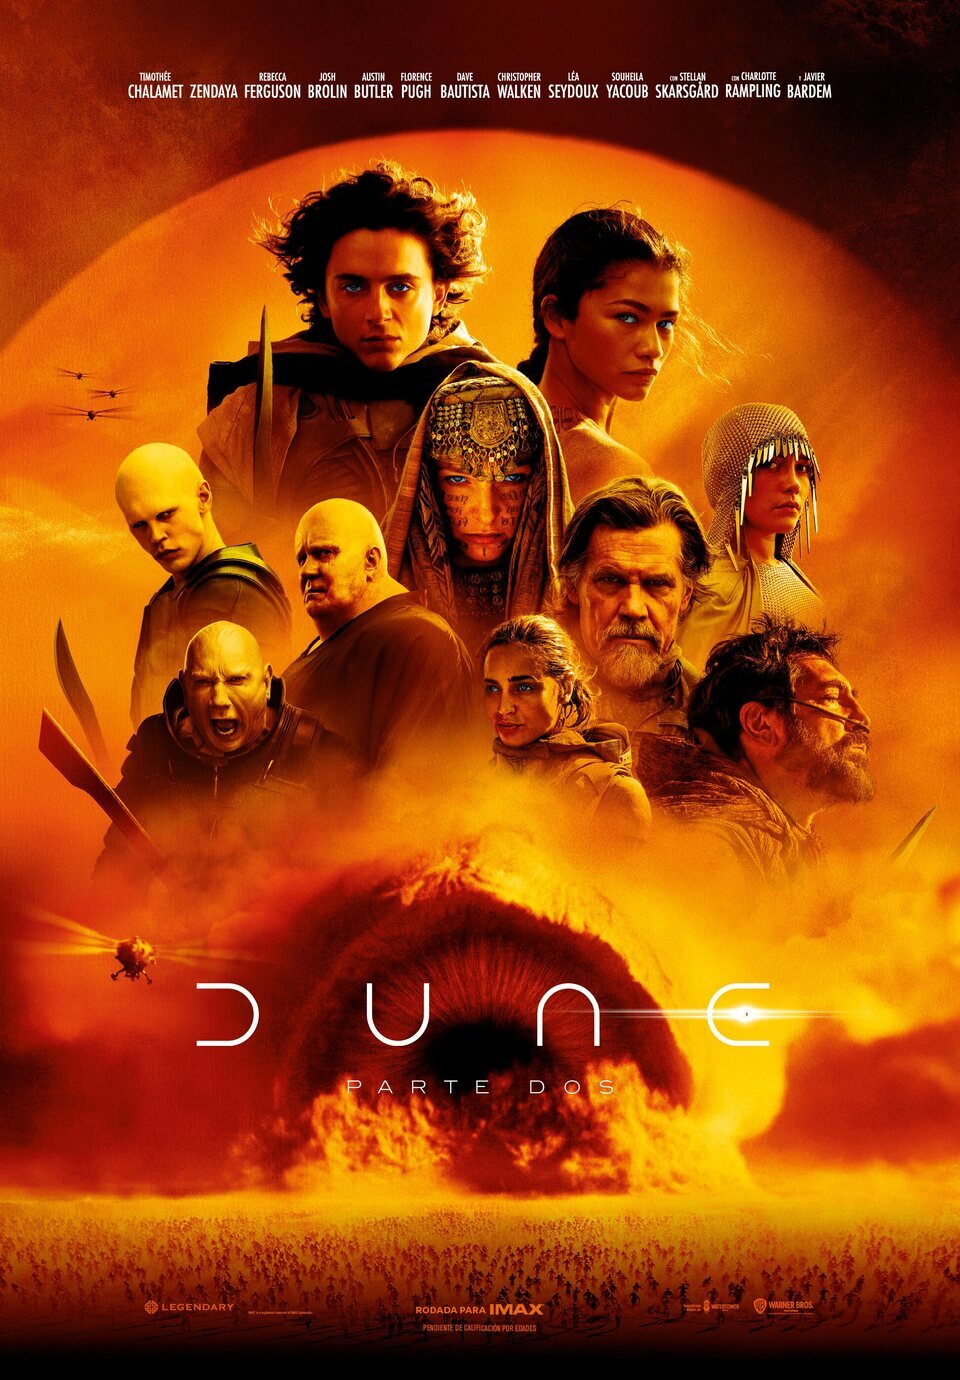 Poster of Dune: Part Two - Cartel final